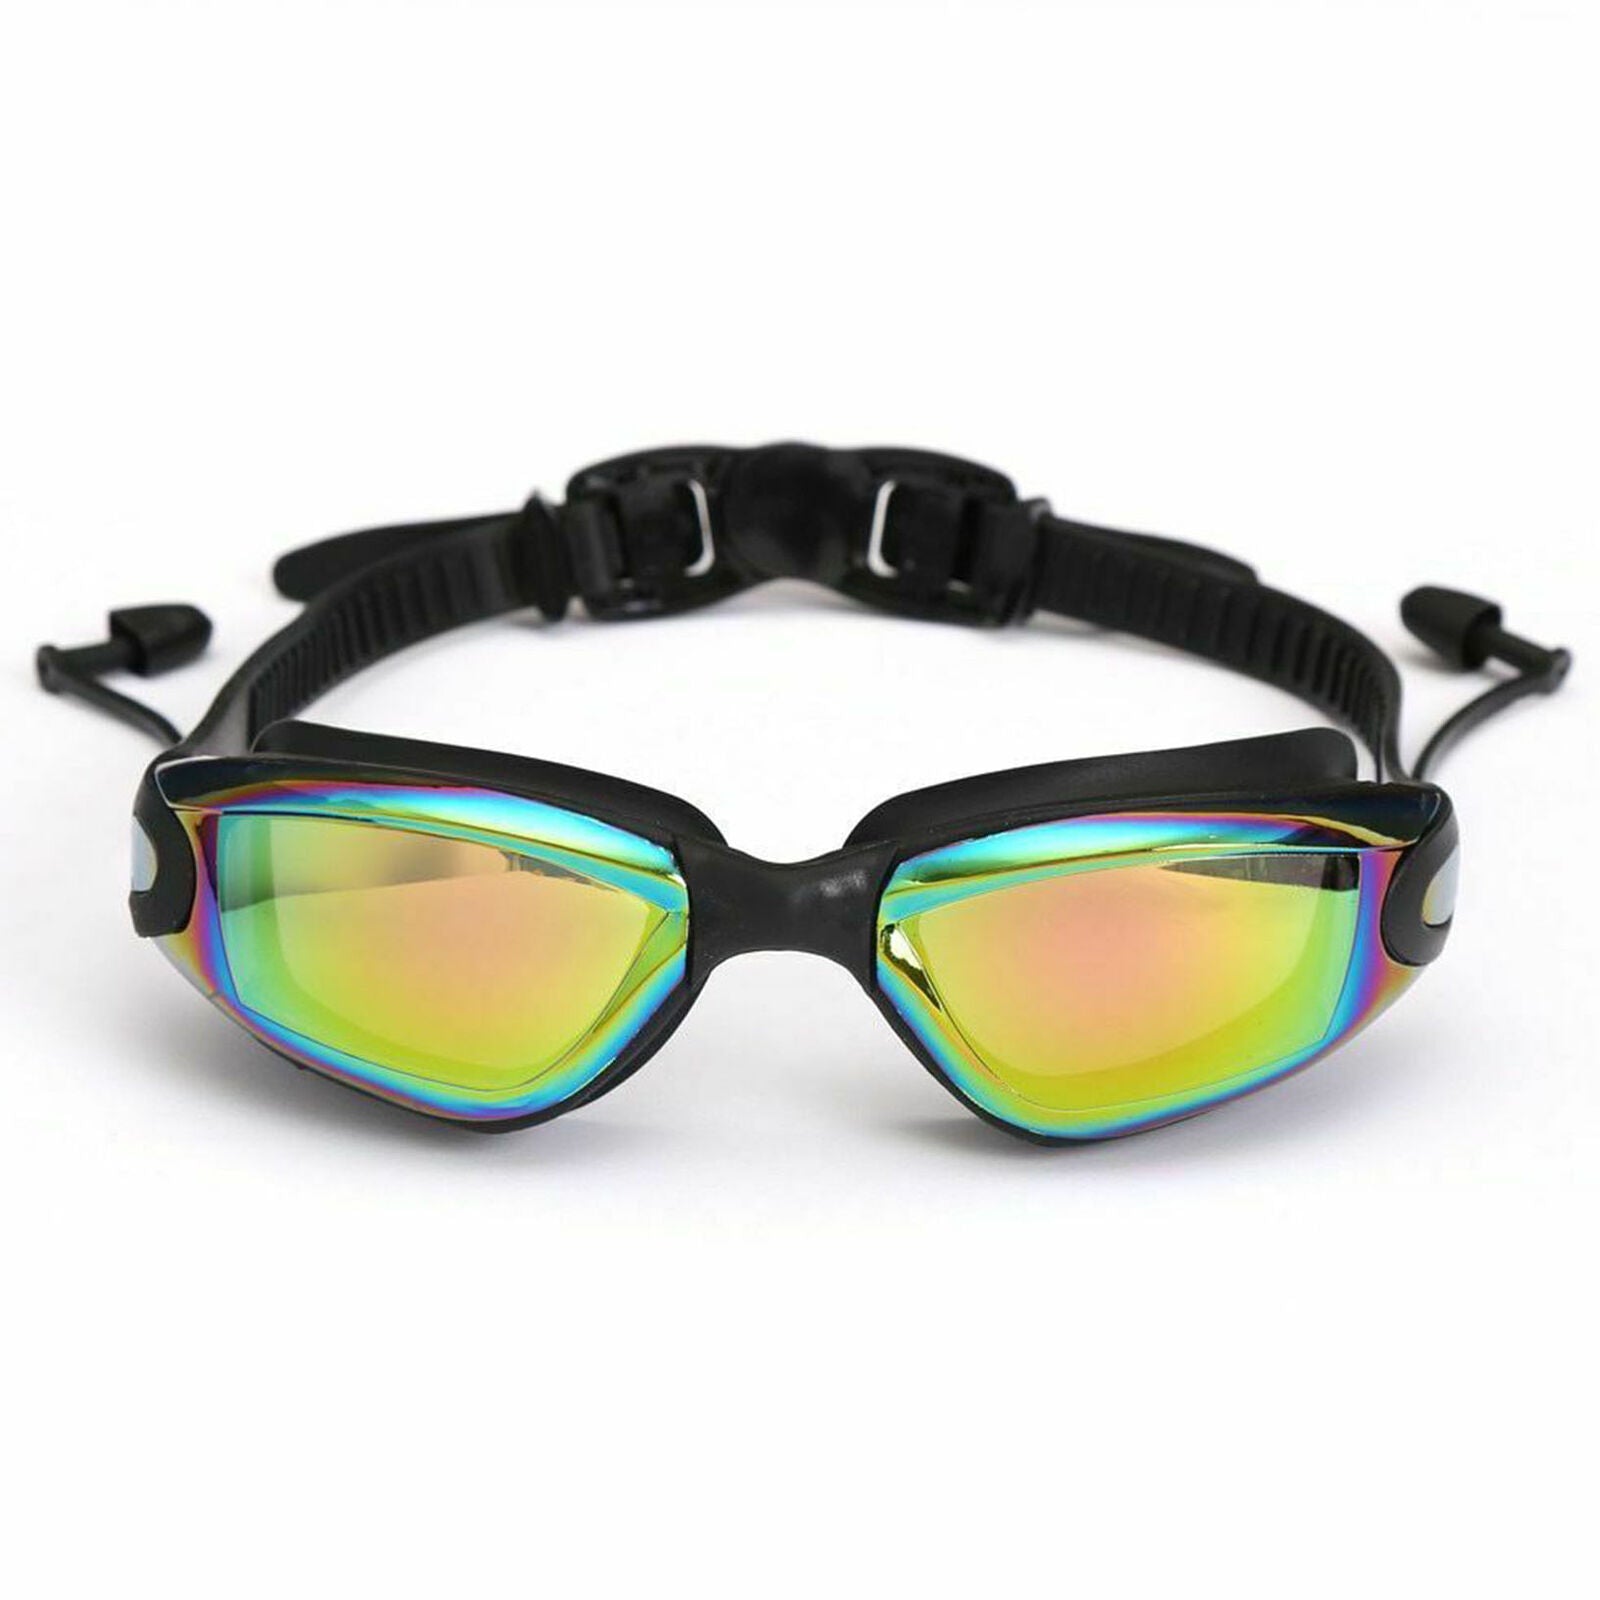 Professional Swimming Goggles swimming glasses with earplugs Nose clip